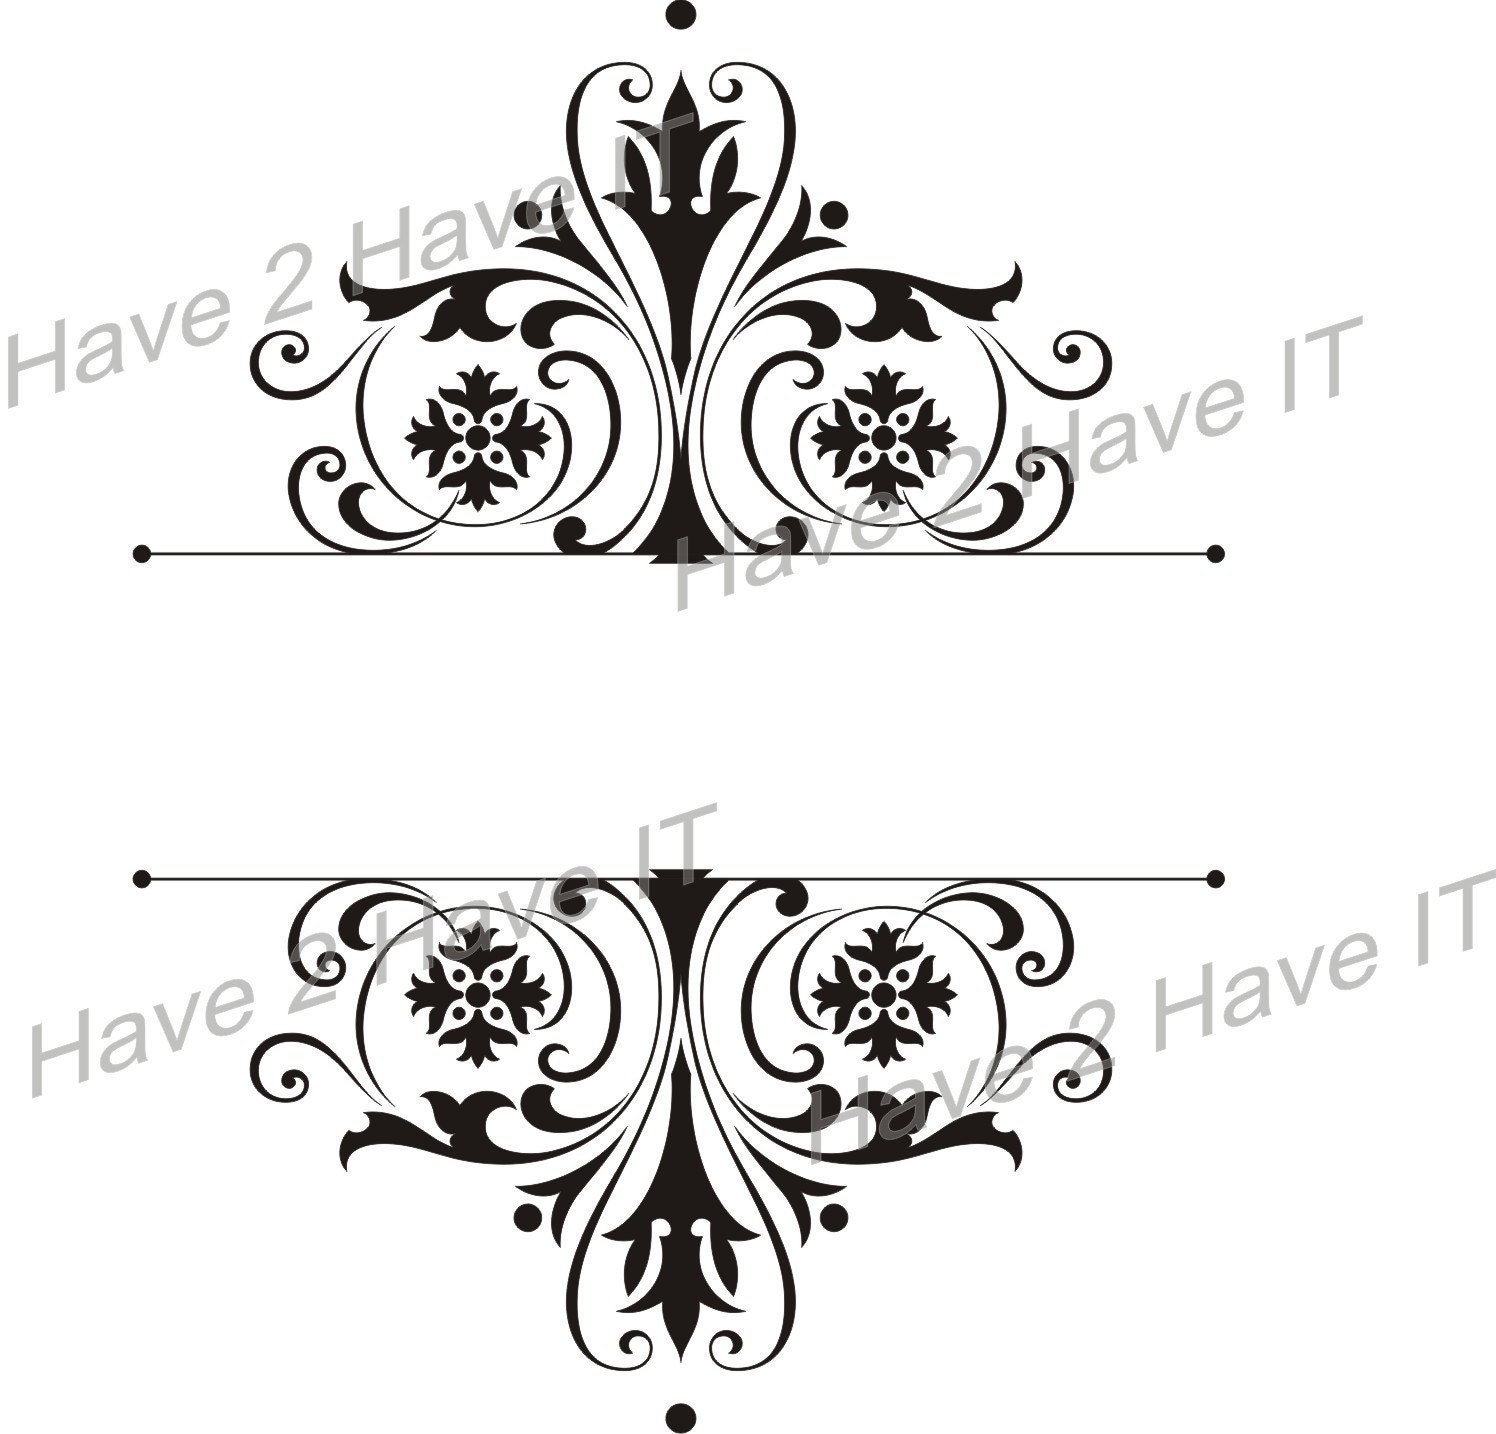 1 Damask SVG, AI, EPS, CDR vector files and FREE JPG High Resolution file